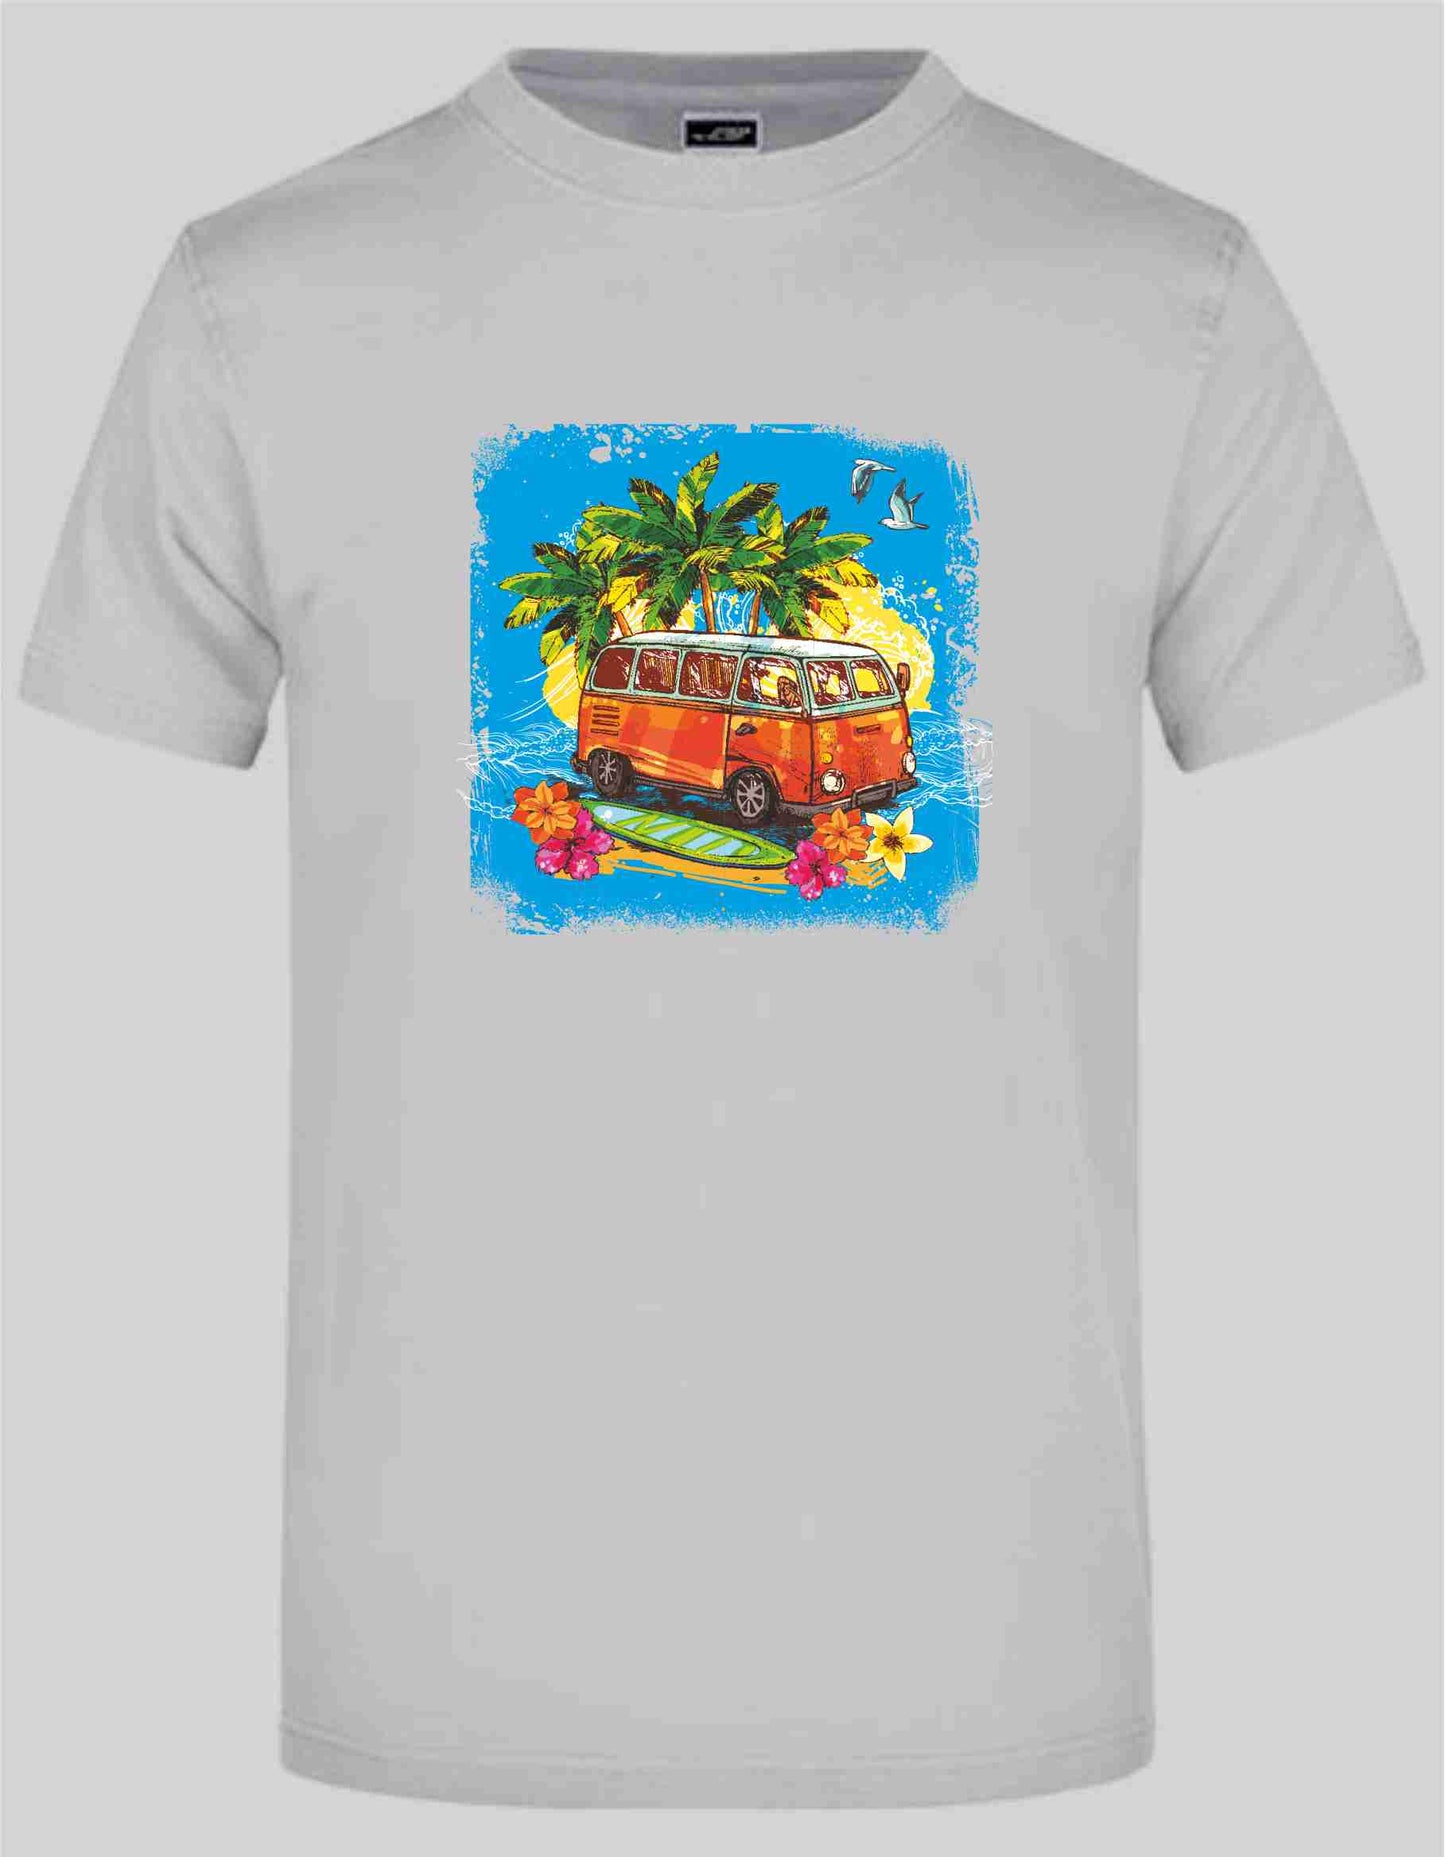 T-Shirt Hippy Style Vintage alter Bus